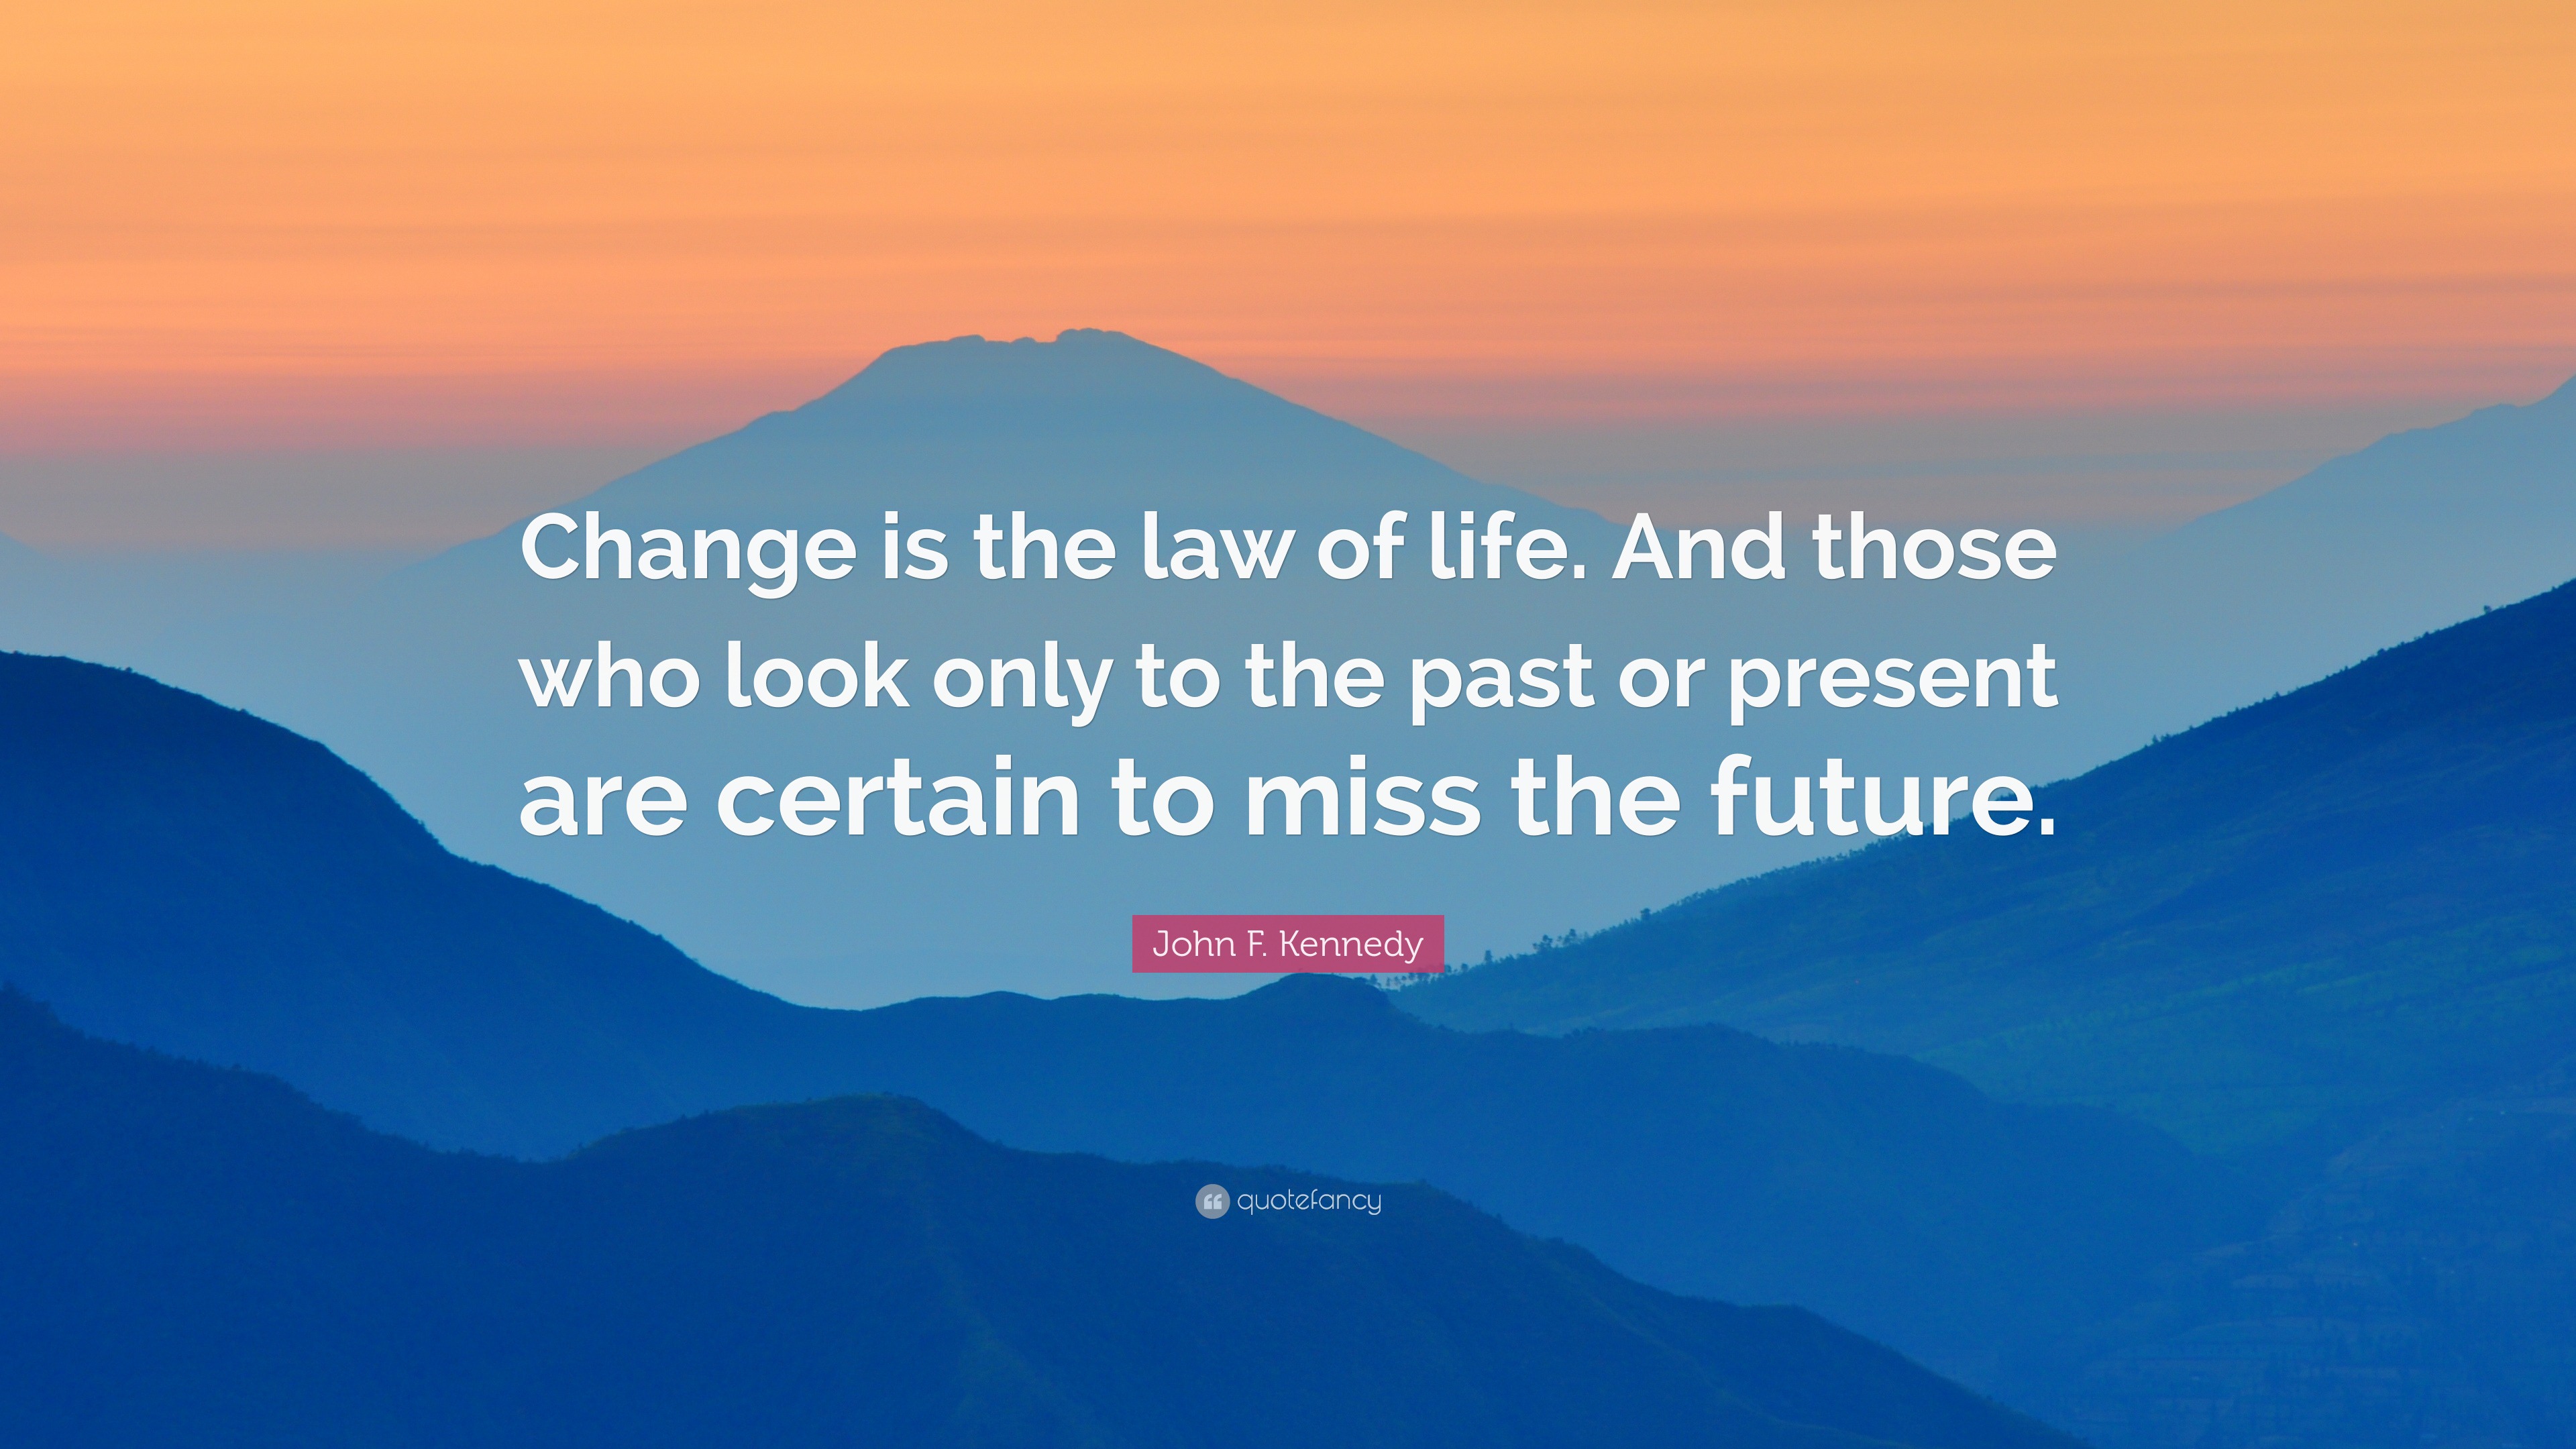 John F. Kennedy Quote: “Change is the law of life. And those who look